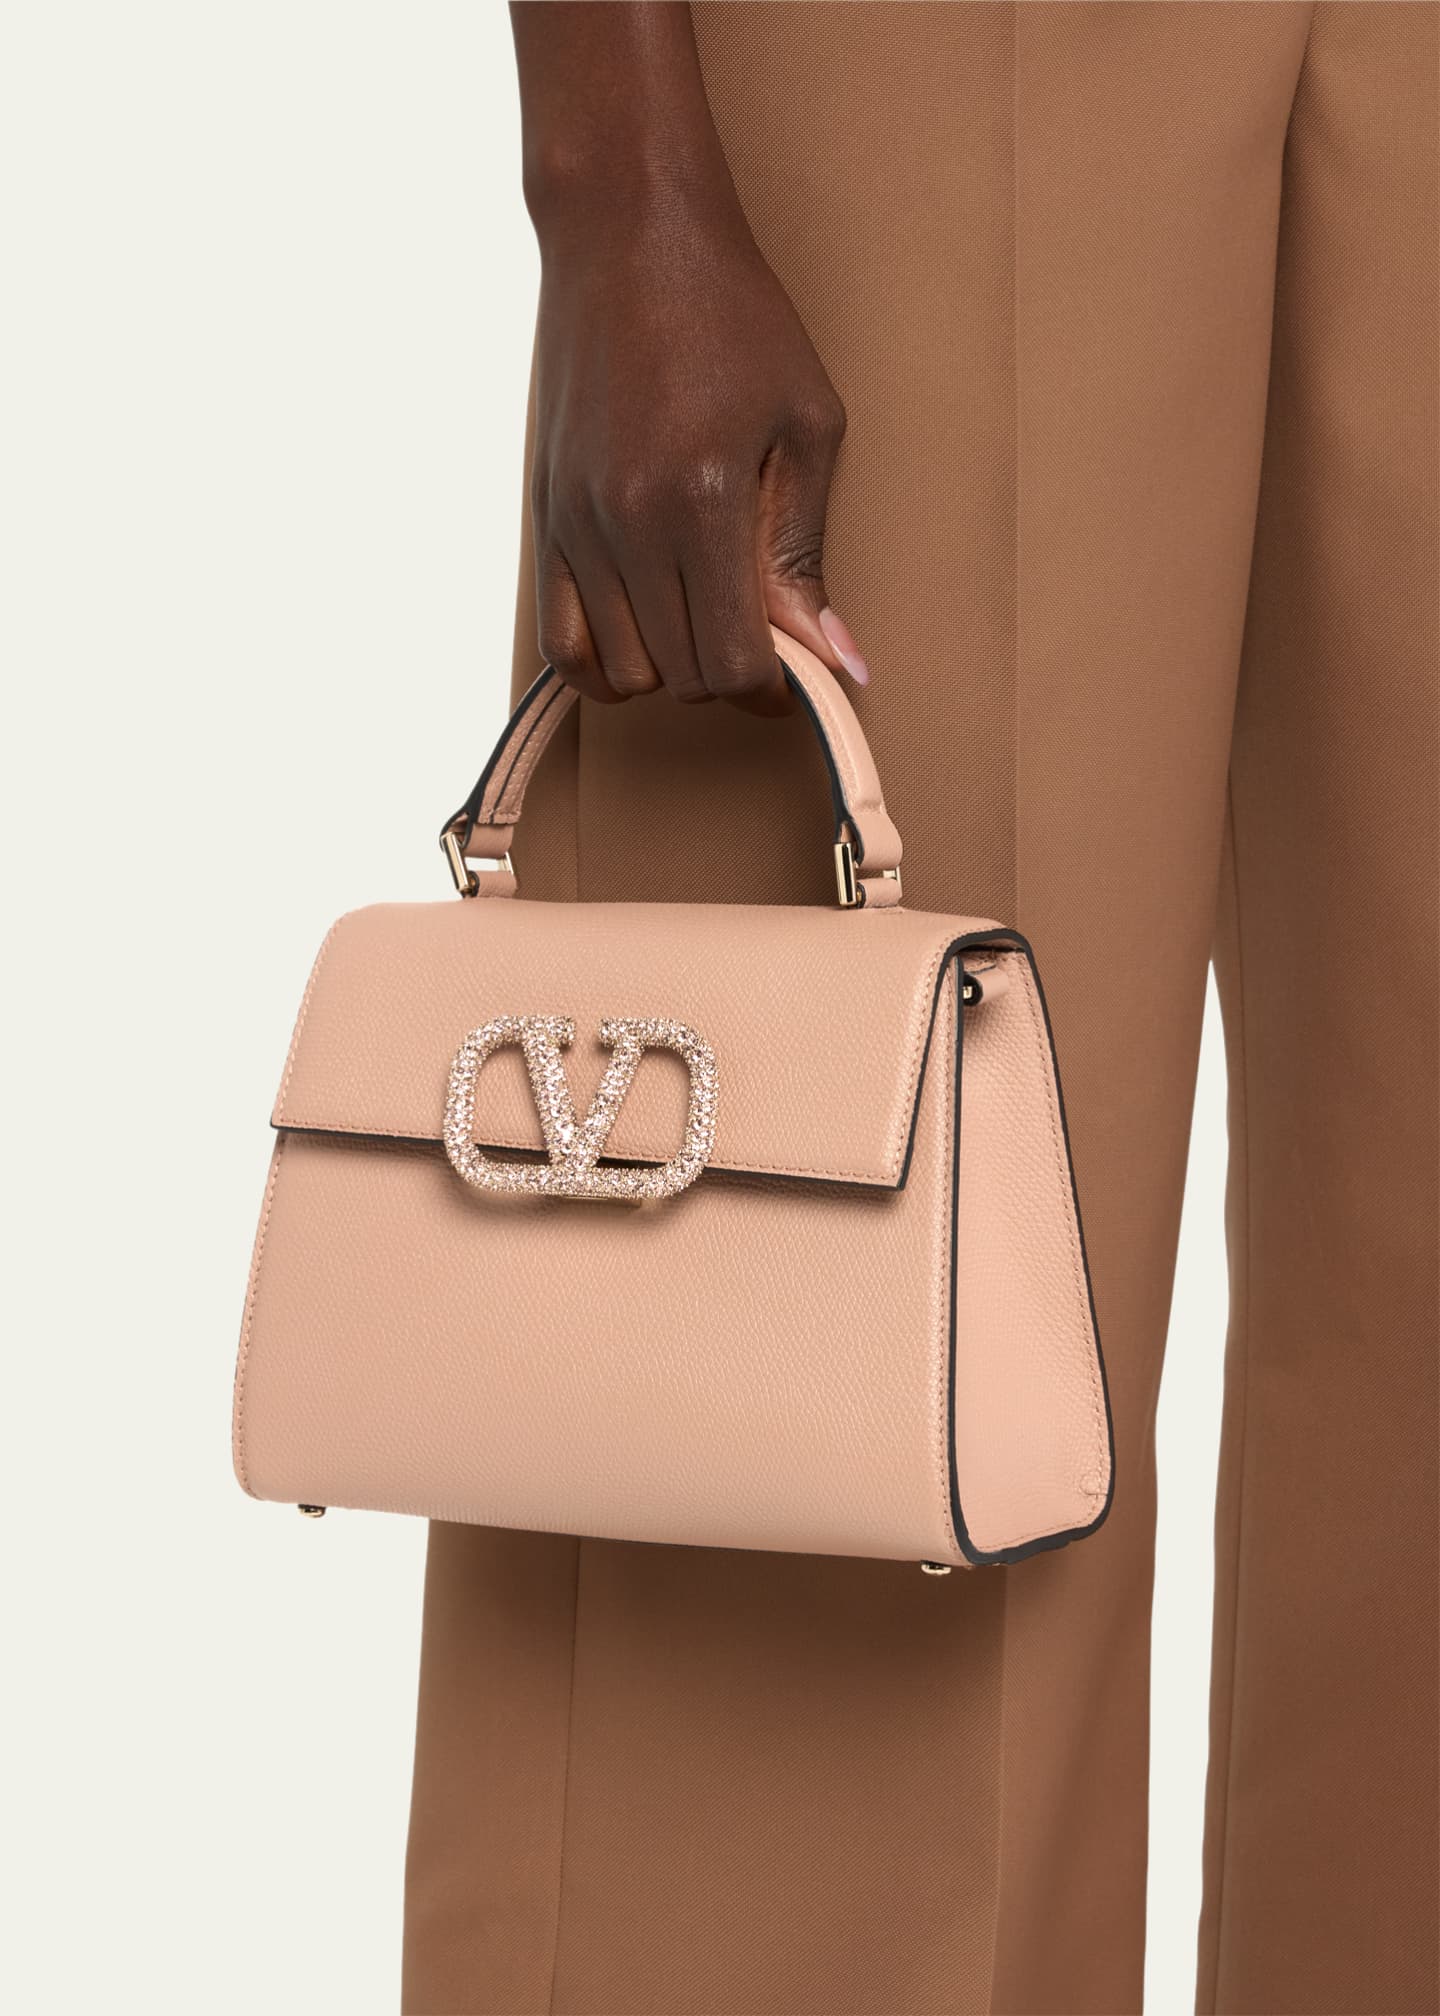 VSLING Small Leather Top-Handle Bag